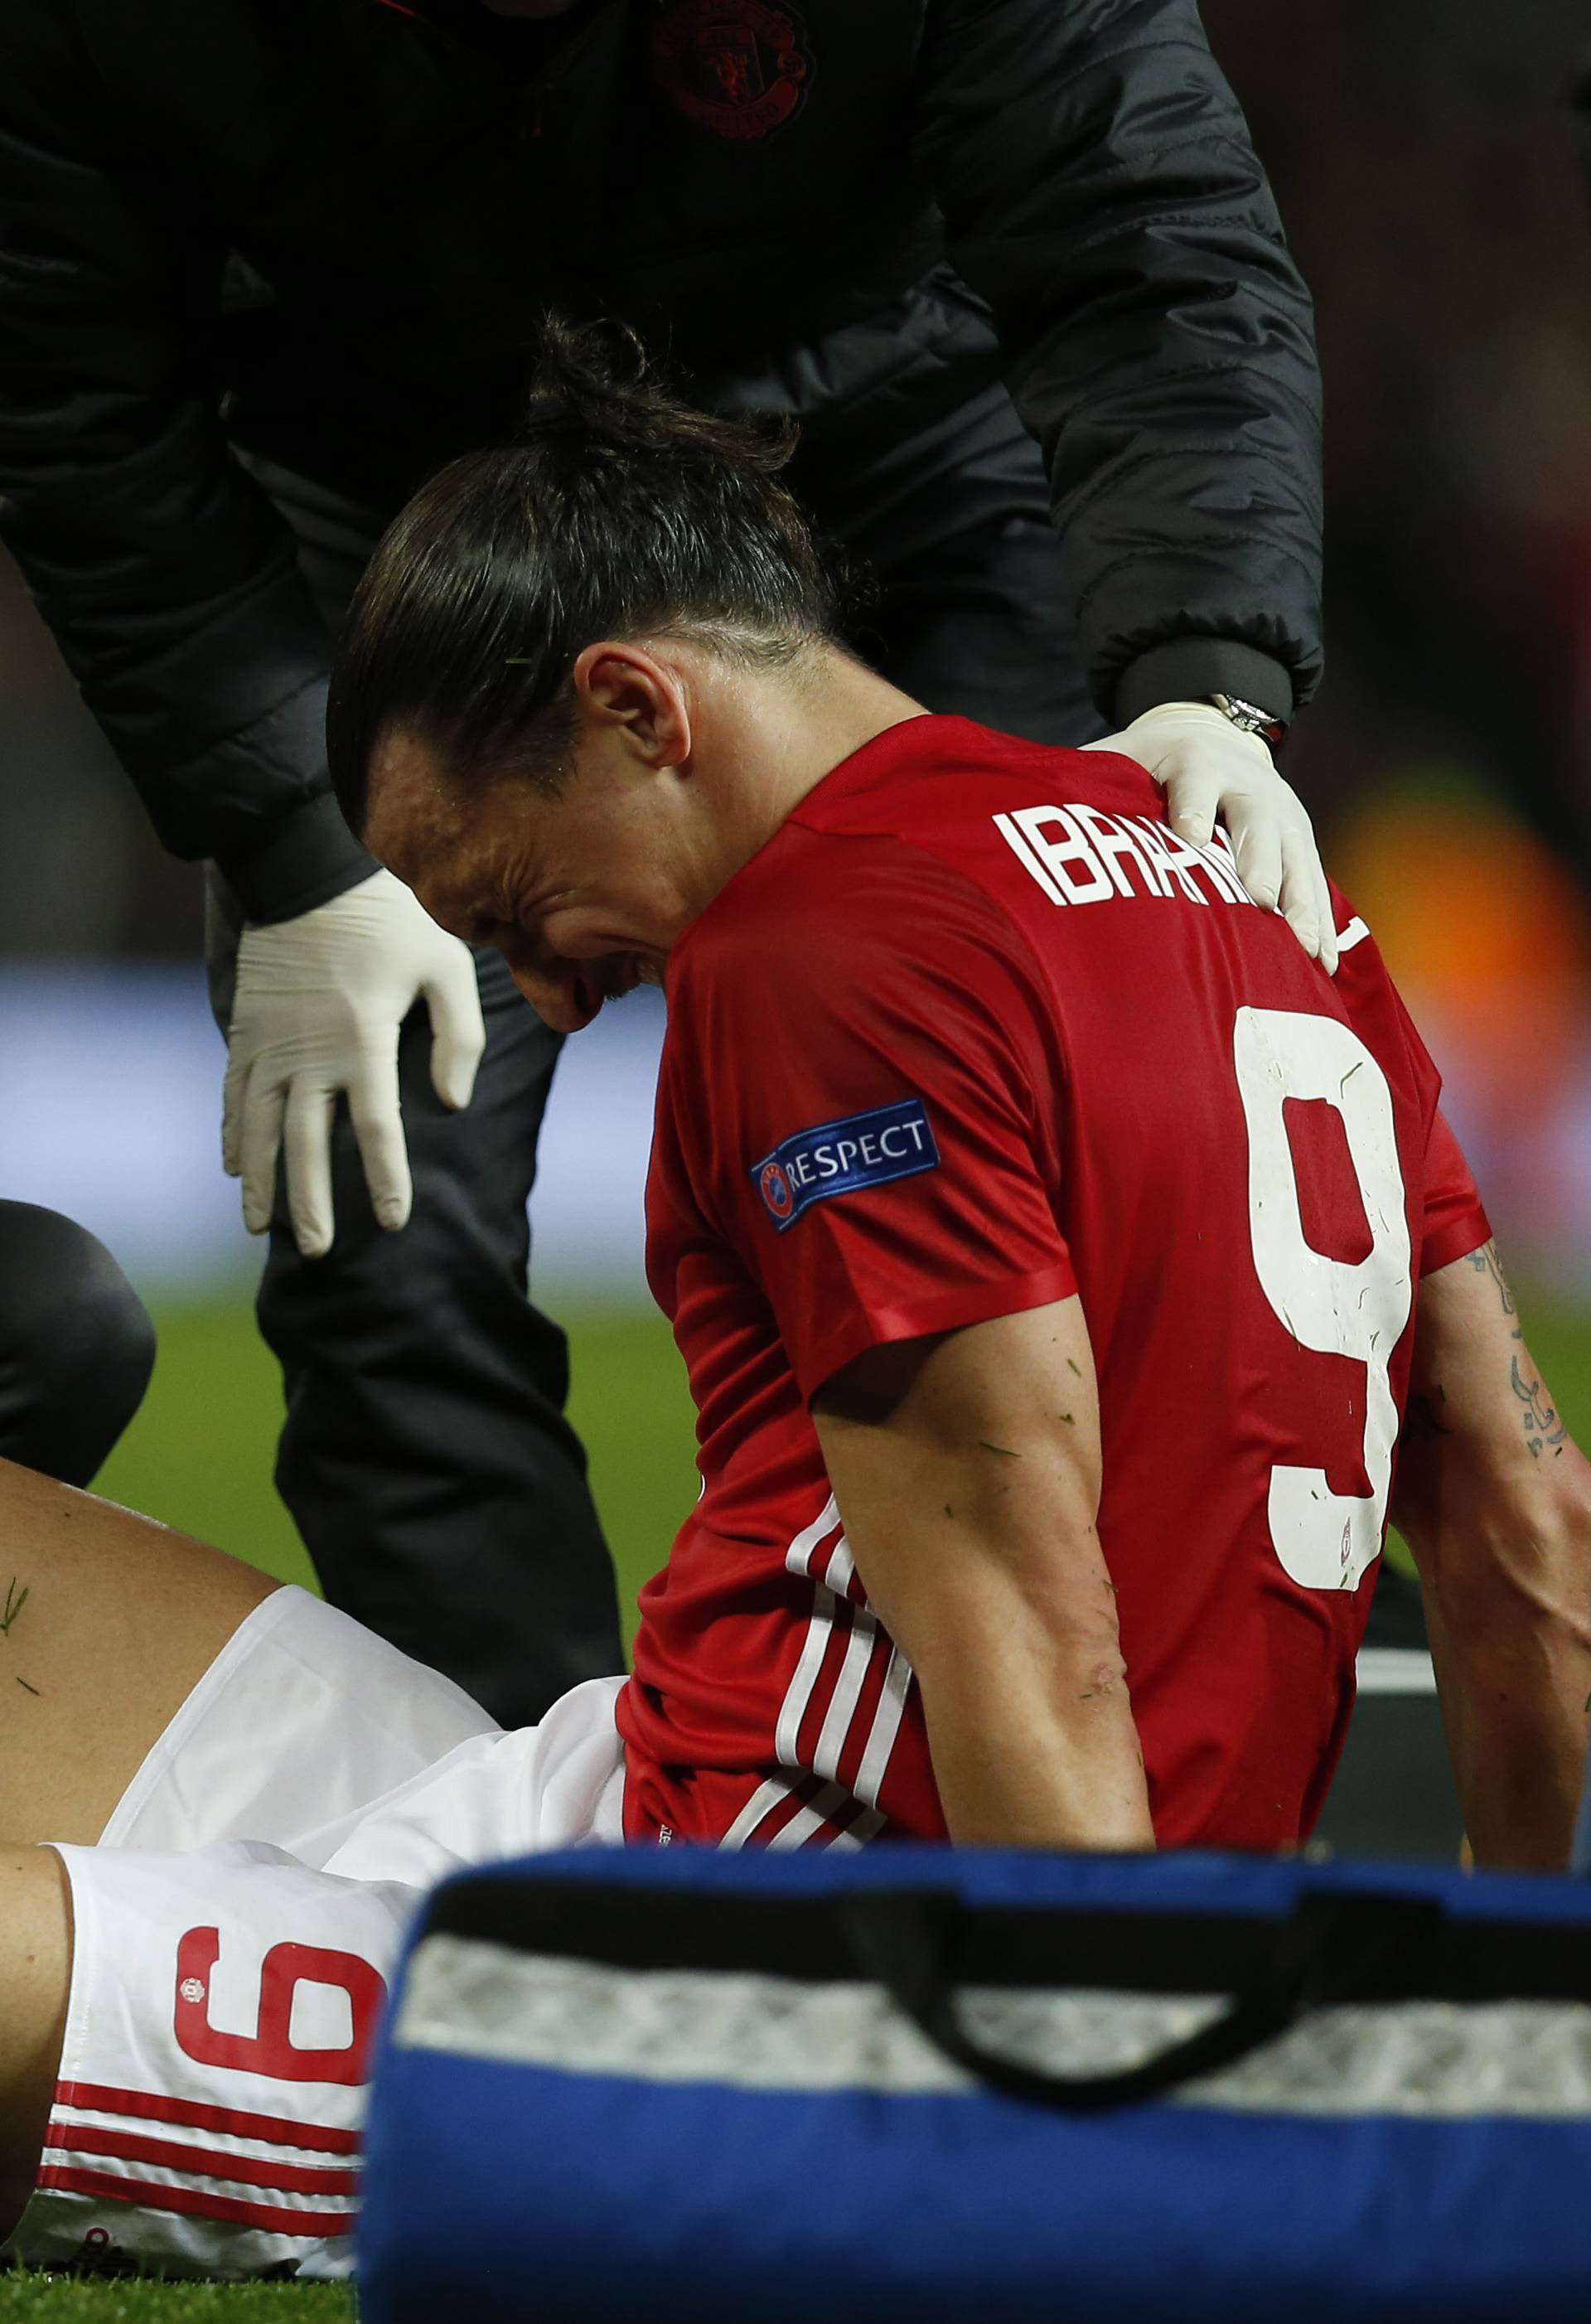 Manchester United's Zlatan Ibrahimovic receives medical attention after sustaining an injury